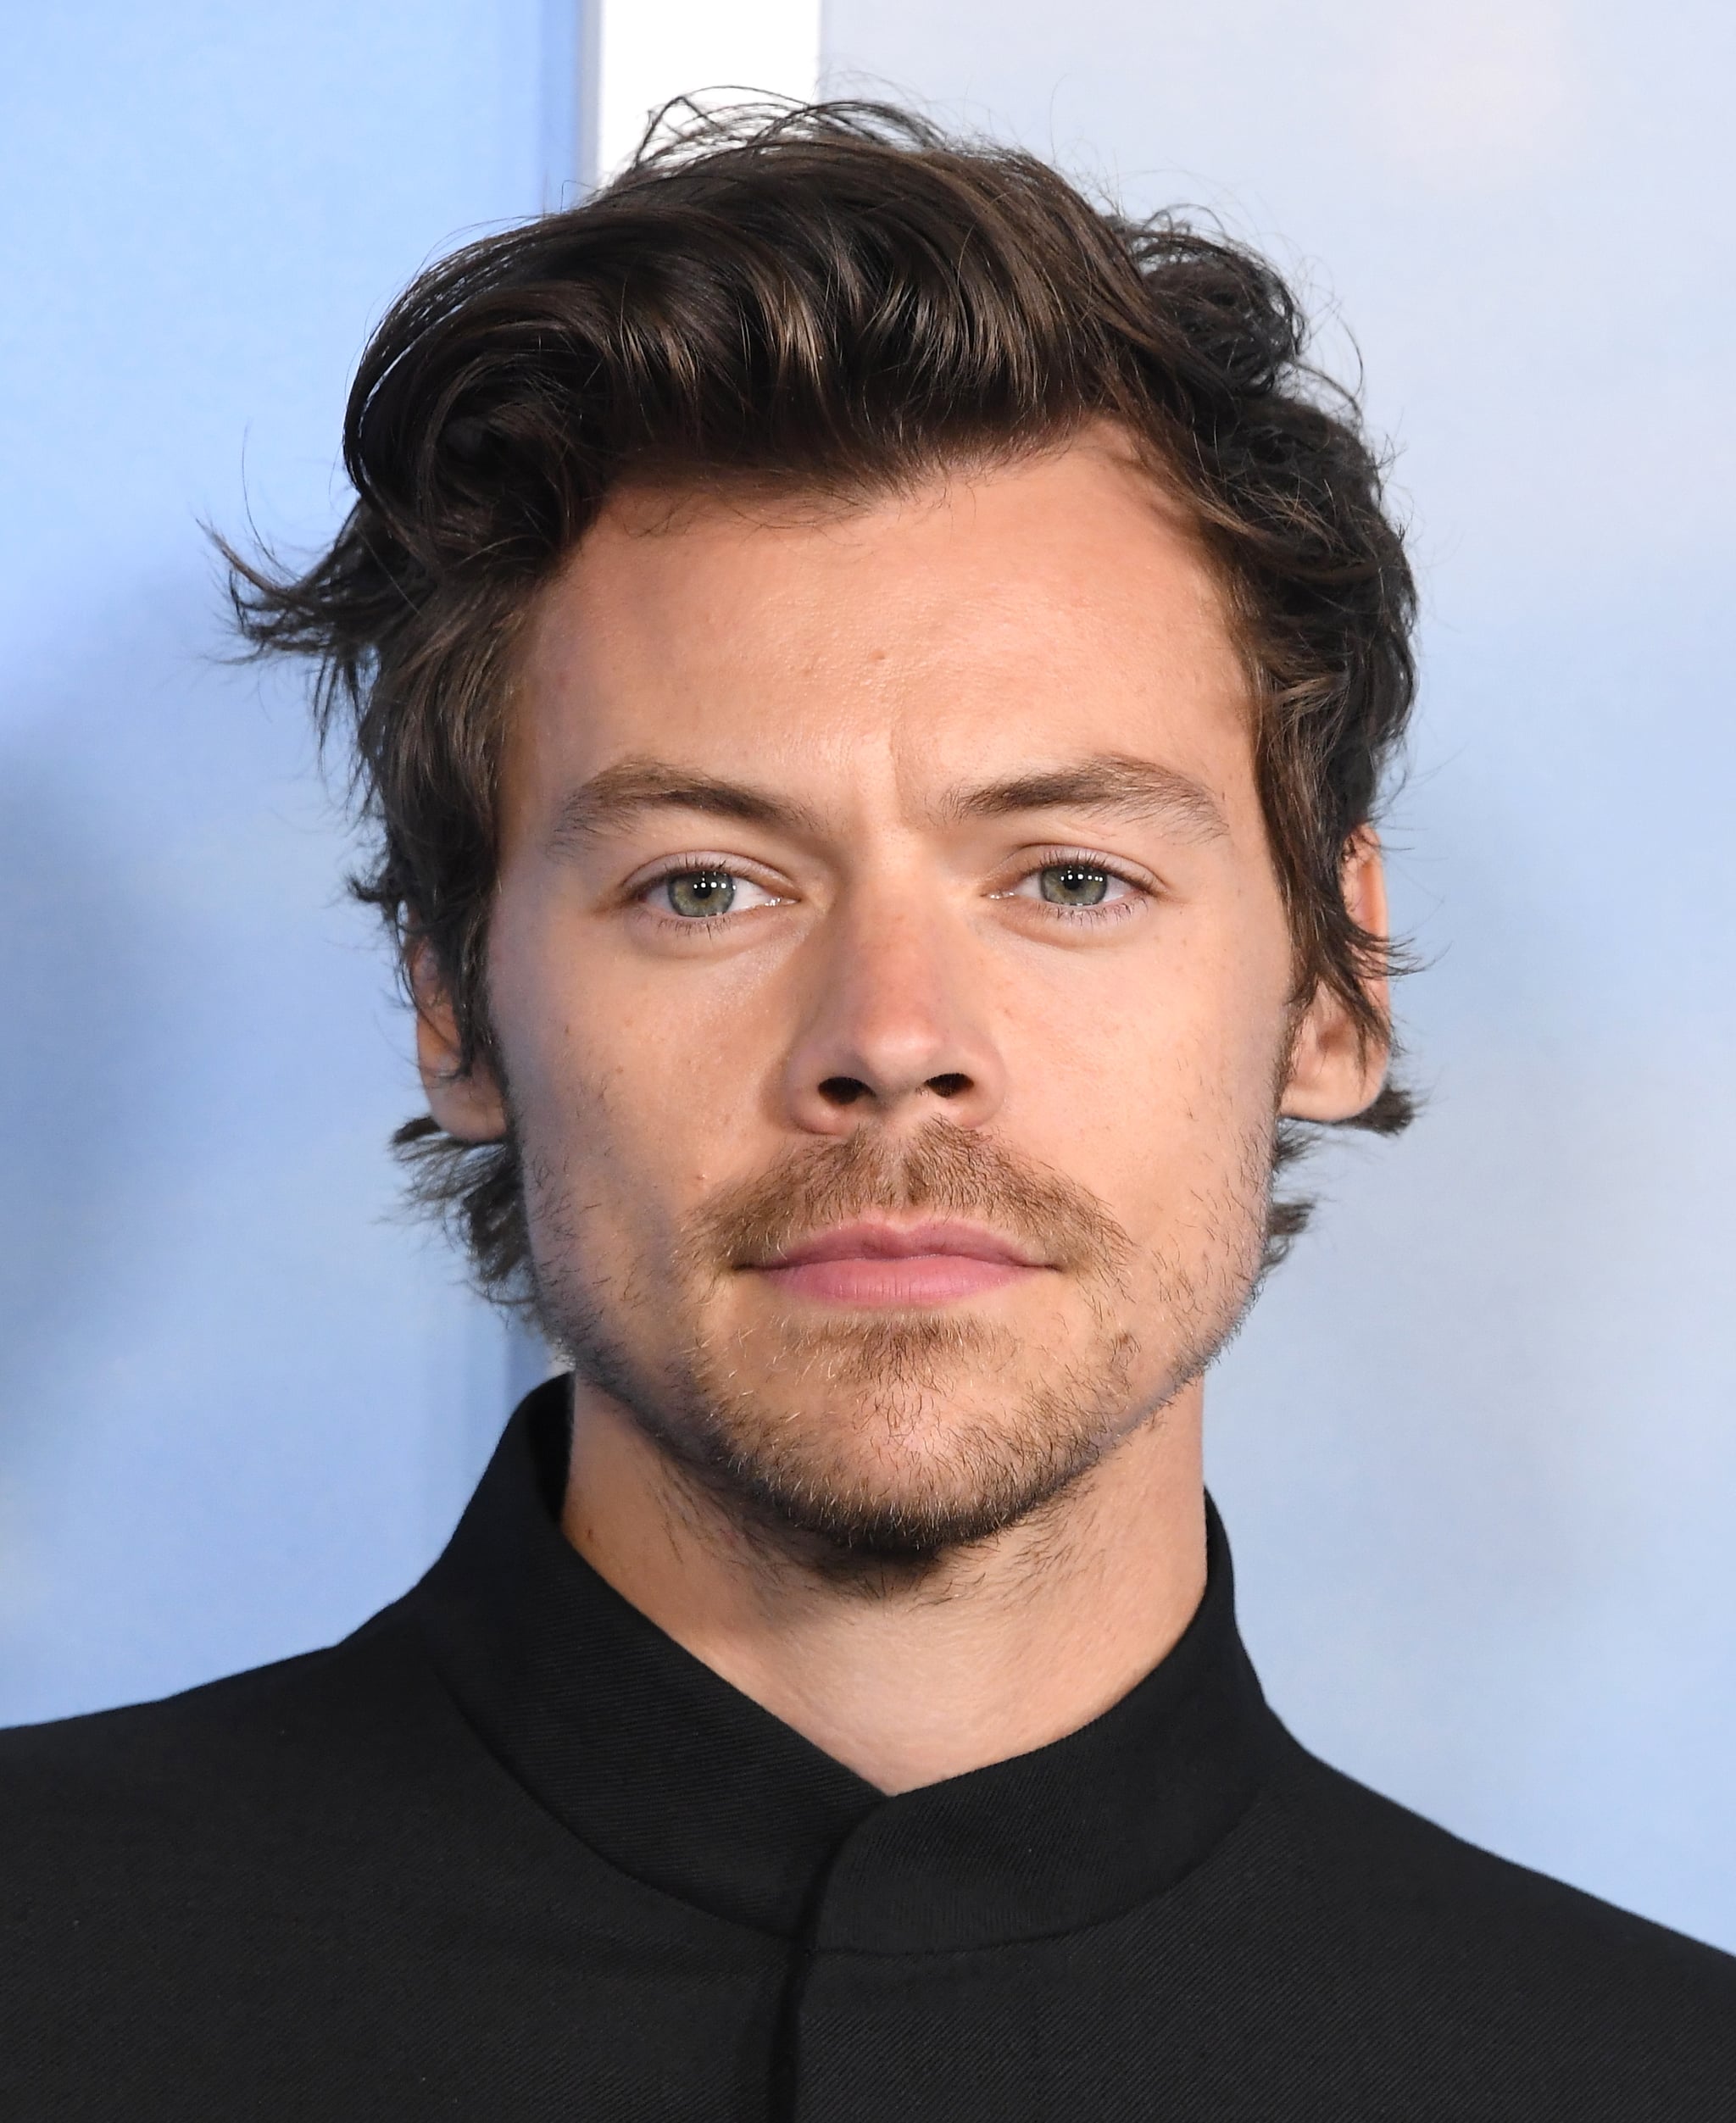 LOS ANGELES, CALIFORNIA - NOVEMBER 01: Harry Styles arrives at the Los Angeles Premiere Of 